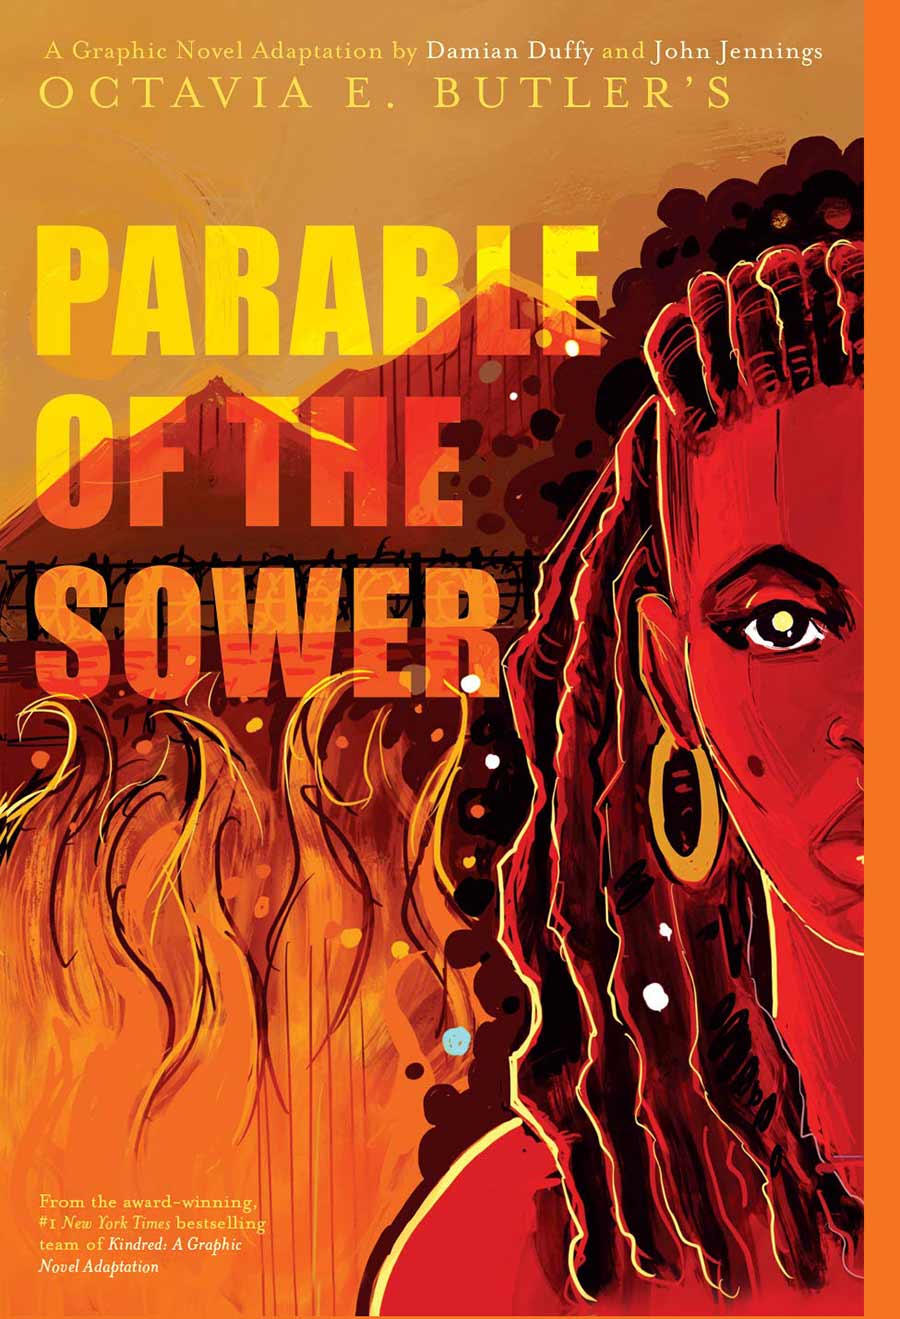 Octavia E. Butler's Parable of the Sower.